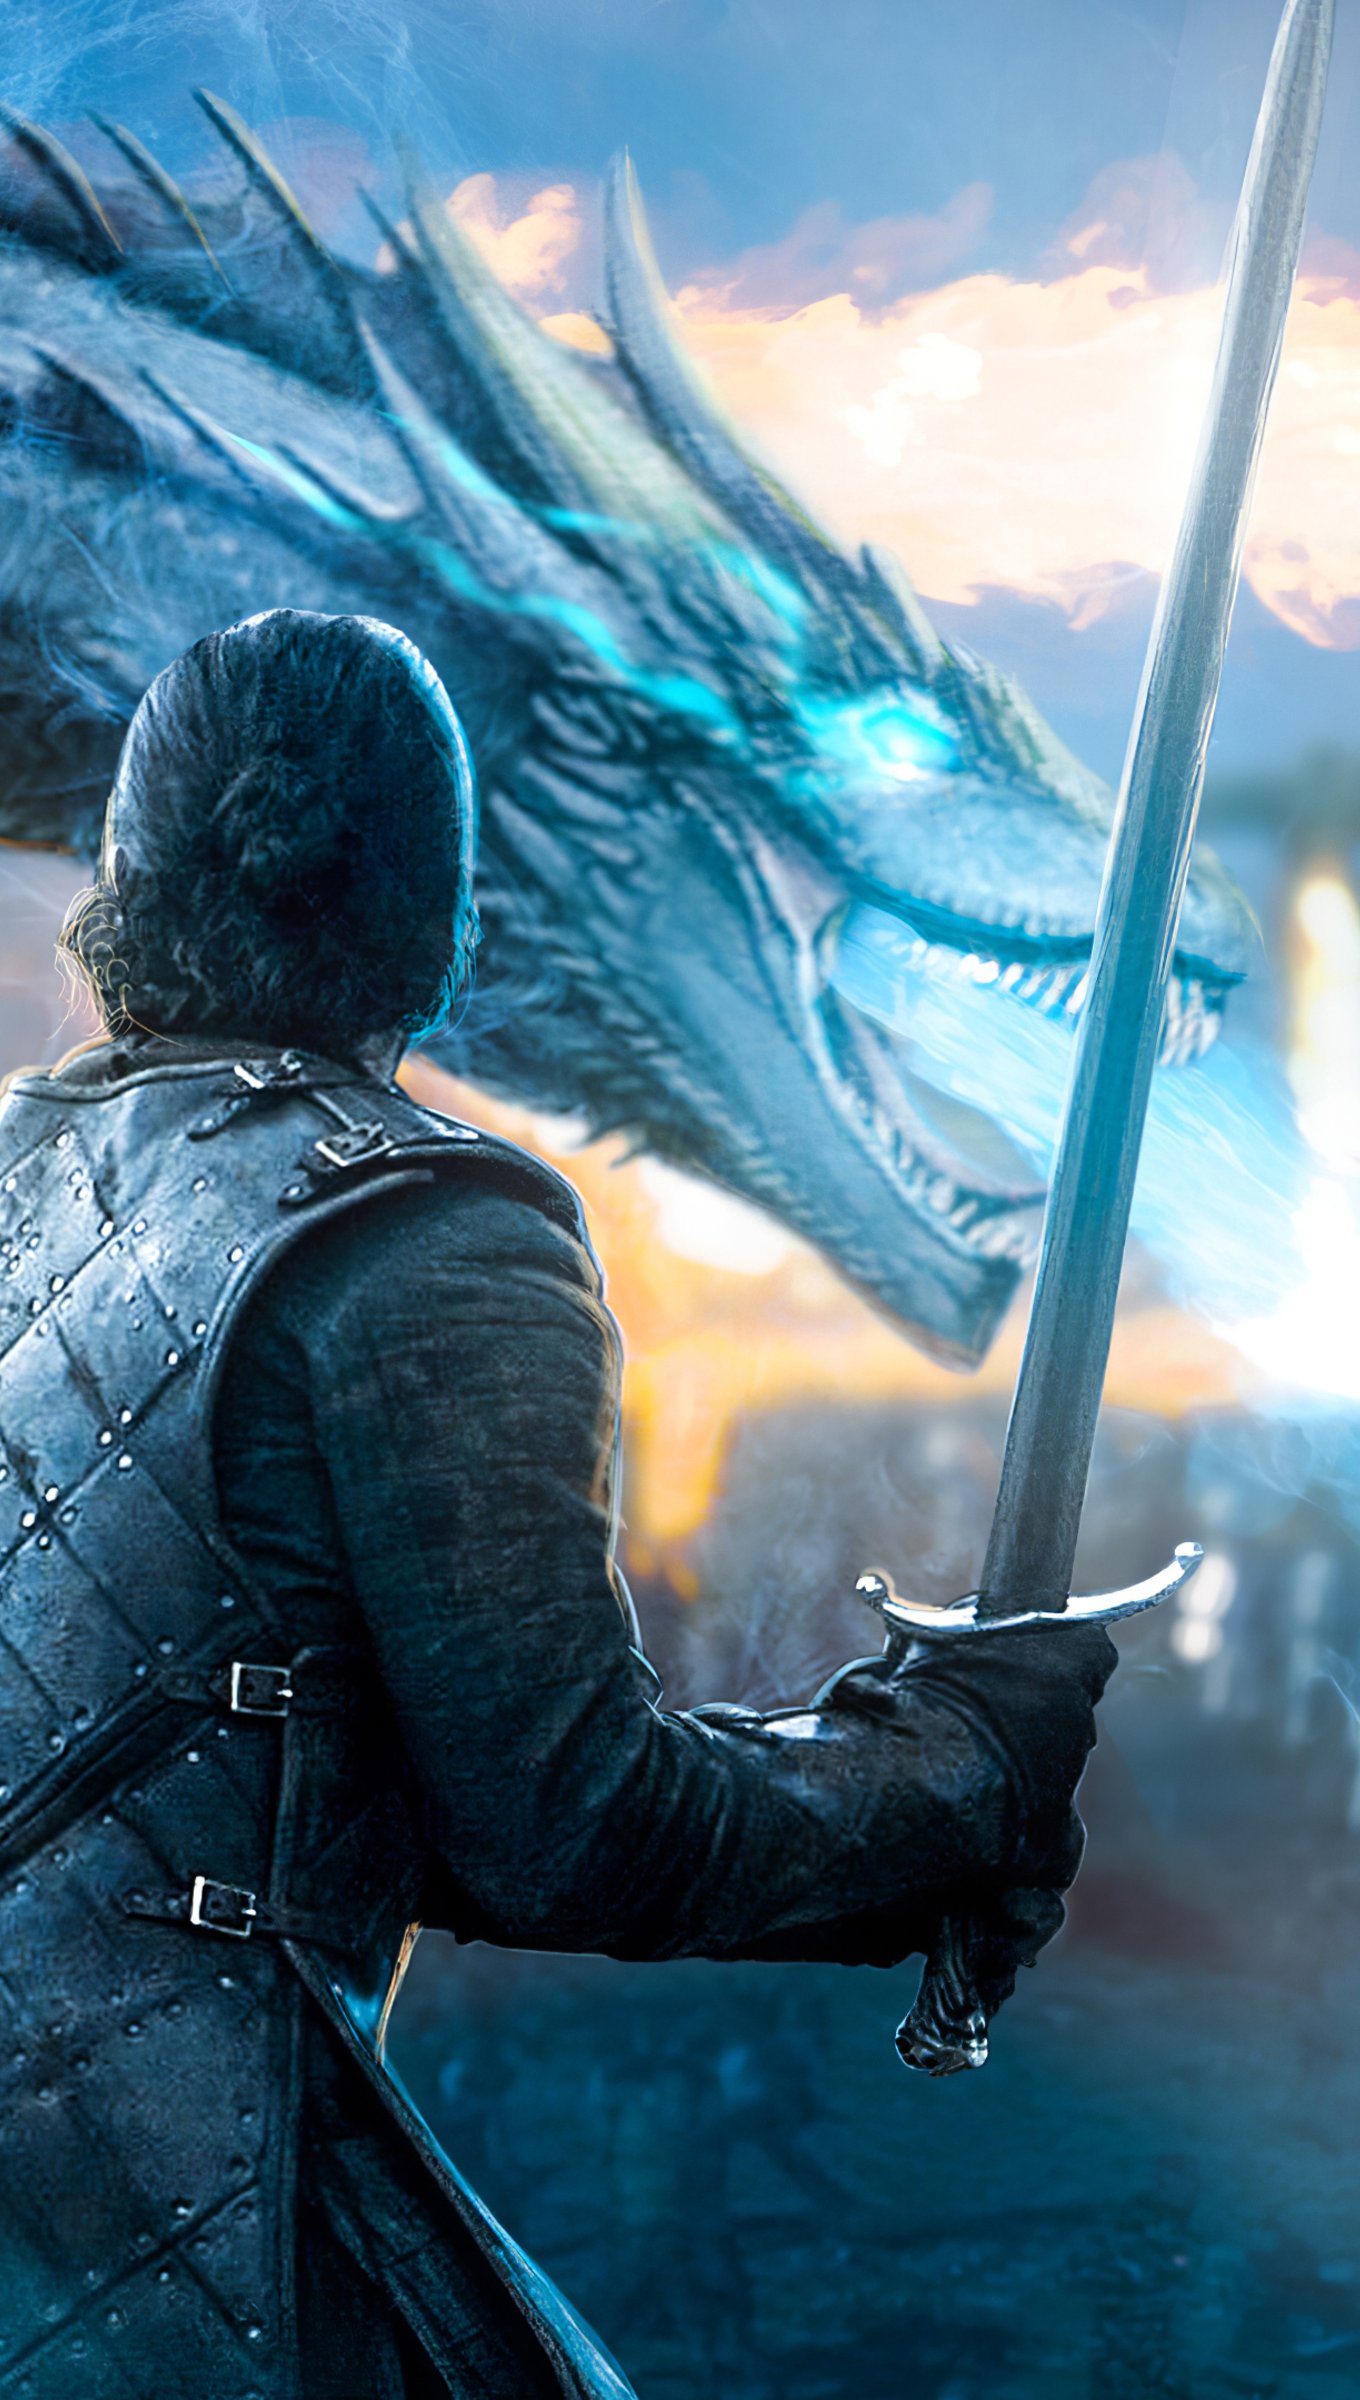 Jon Snow with dragon from Game of thrones Wallpaper 4k Ultra HD